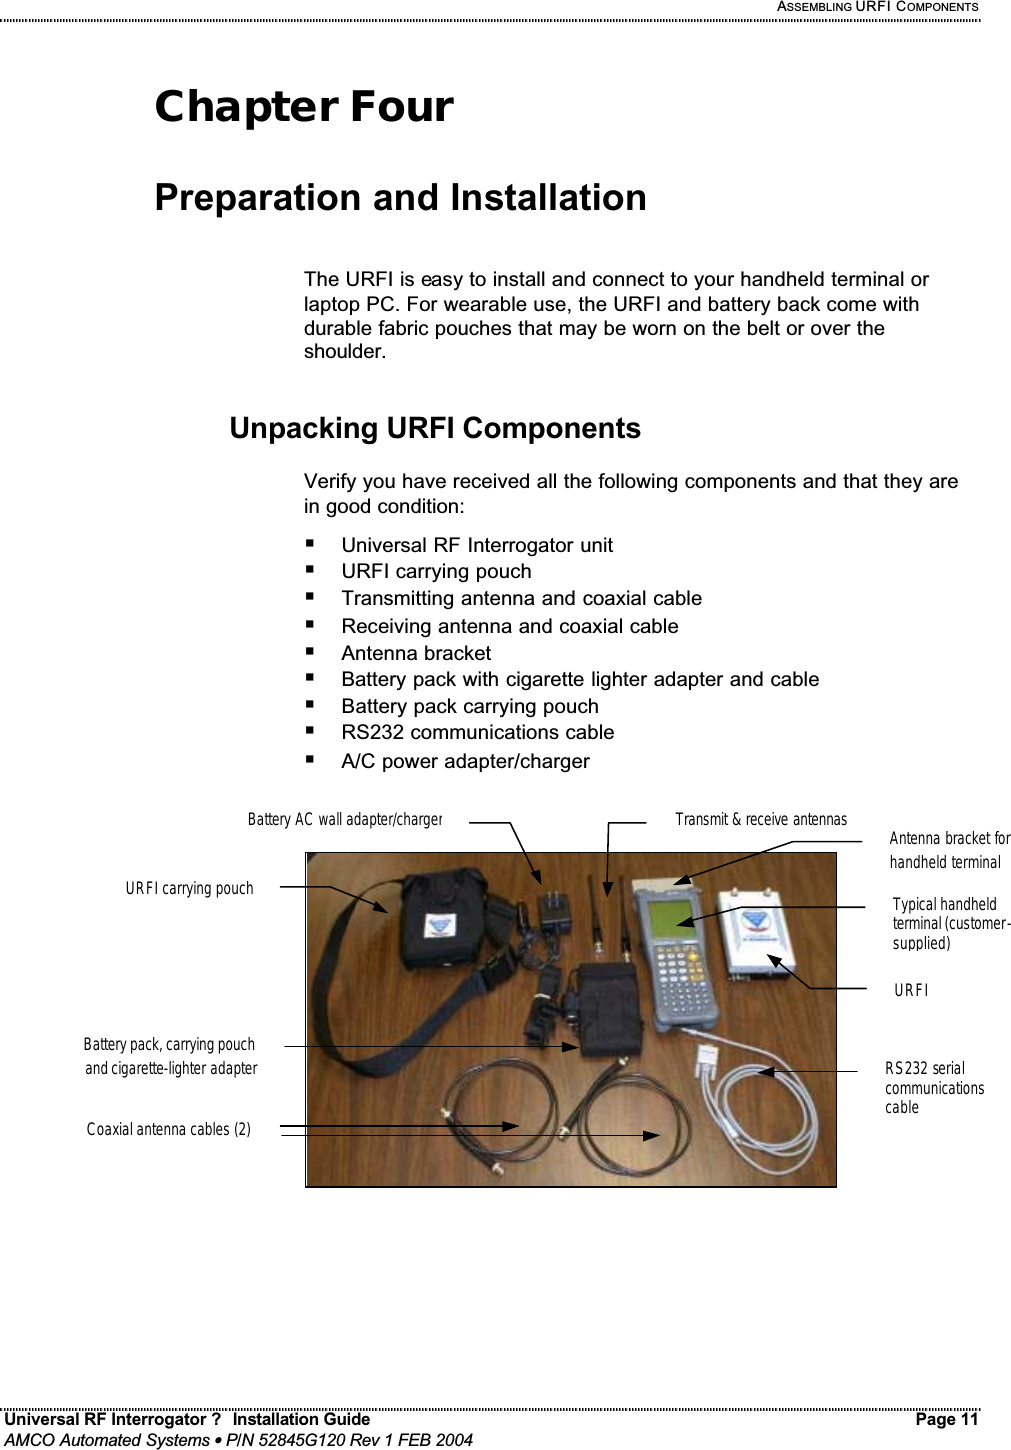   ASSEMBLING URFI COMPONENTS Universal RF Interrogator ?  Installation Guide    Page 11  AMCO Automated Systems • P/N 52845G120 Rev 1 FEB 2004                                                                                                                                 Chapter Four  Preparation and Installation   The URFI is easy to install and connect to your handheld terminal or laptop PC. For wearable use, the URFI and battery back come with durable fabric pouches that may be worn on the belt or over the shoulder.   Unpacking URFI Components  Verify you have received all the following components and that they are in good condition: ! Universal RF Interrogator unit ! URFI carrying pouch ! Transmitting antenna and coaxial cable ! Receiving antenna and coaxial cable ! Antenna bracket ! Battery pack with cigarette lighter adapter and cable ! Battery pack carrying pouch ! RS232 communications cable ! A/C power adapter/charger      Typical handheld terminal (customer-supplied) URFI RS232 serial communications cable Transmit &amp; receive antennas URFI carrying pouchBattery pack, carrying pouch and cigarette-lighter adapterBattery AC wall adapter/chargerCoaxial antenna cables (2)Antenna bracket for handheld terminal 